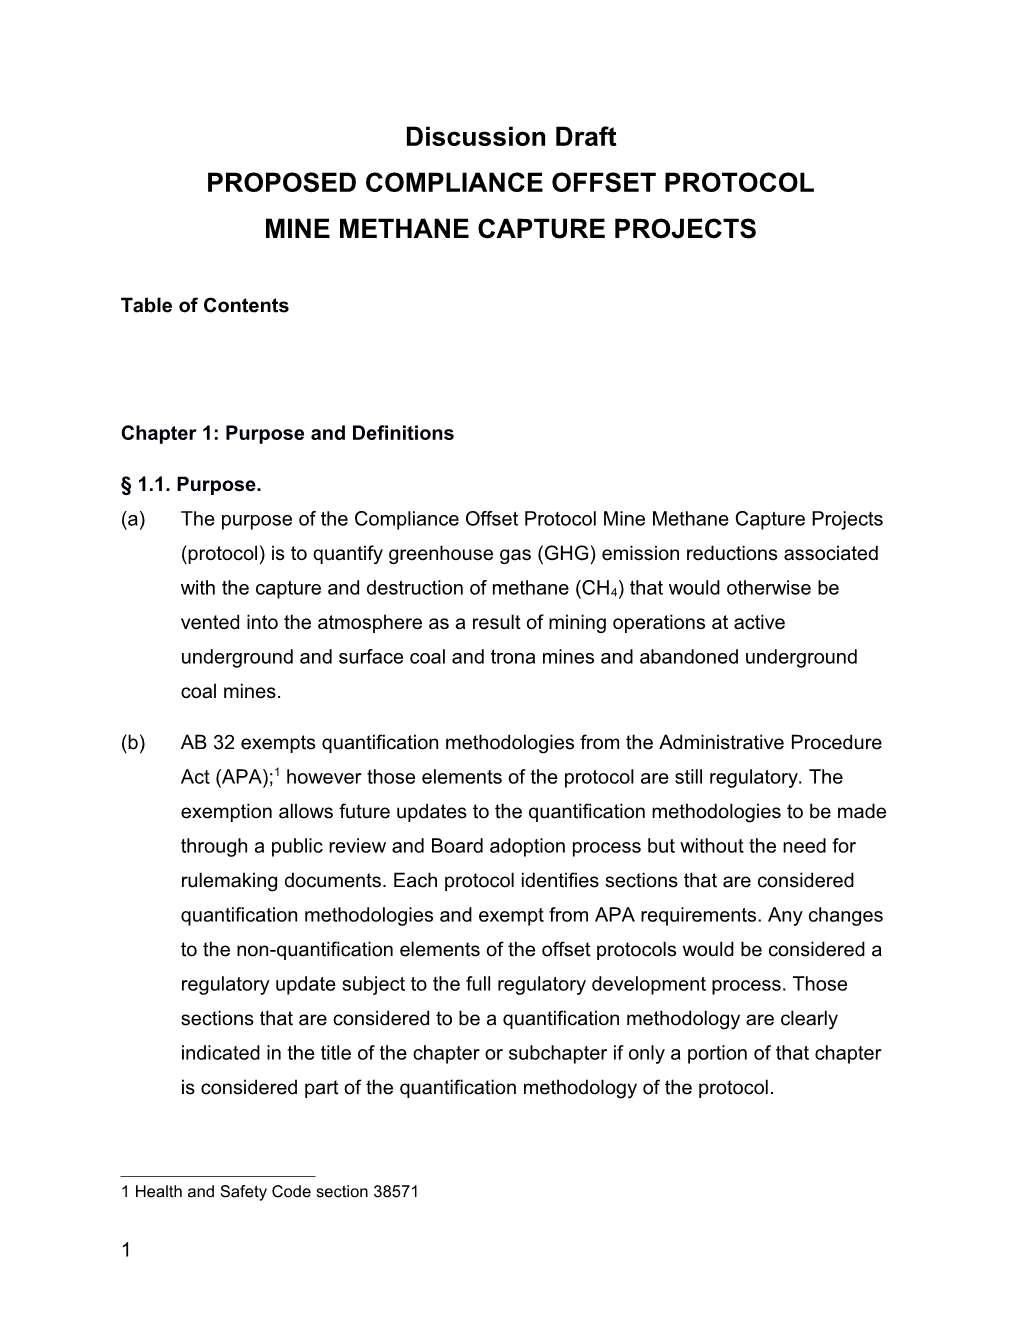 Proposed Compliance Offset Protocol